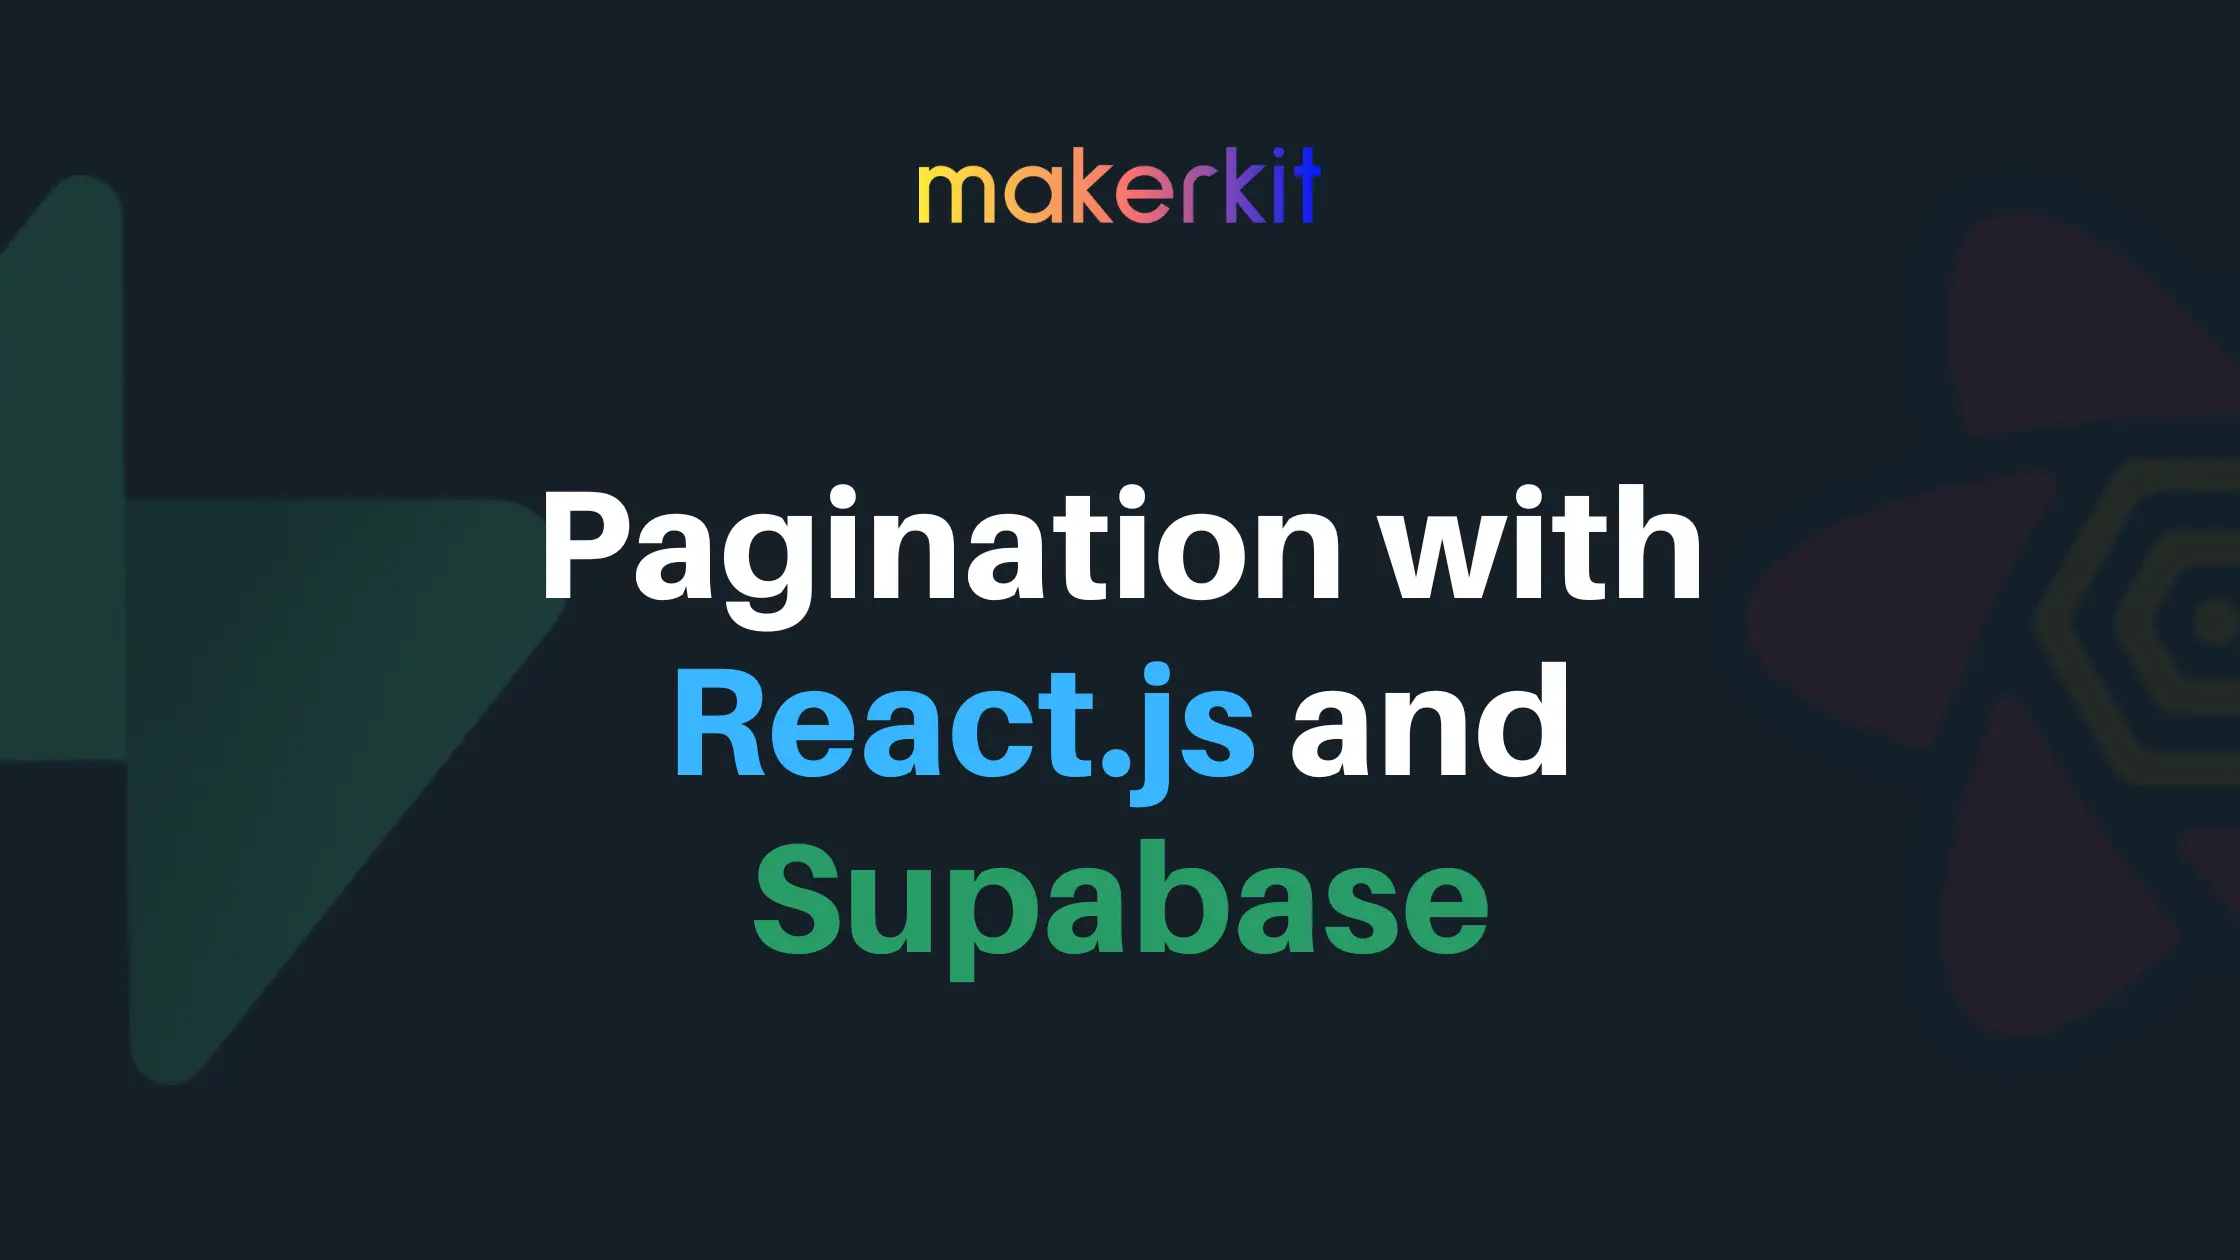 Cover Image for Pagination with React.js and Supabase